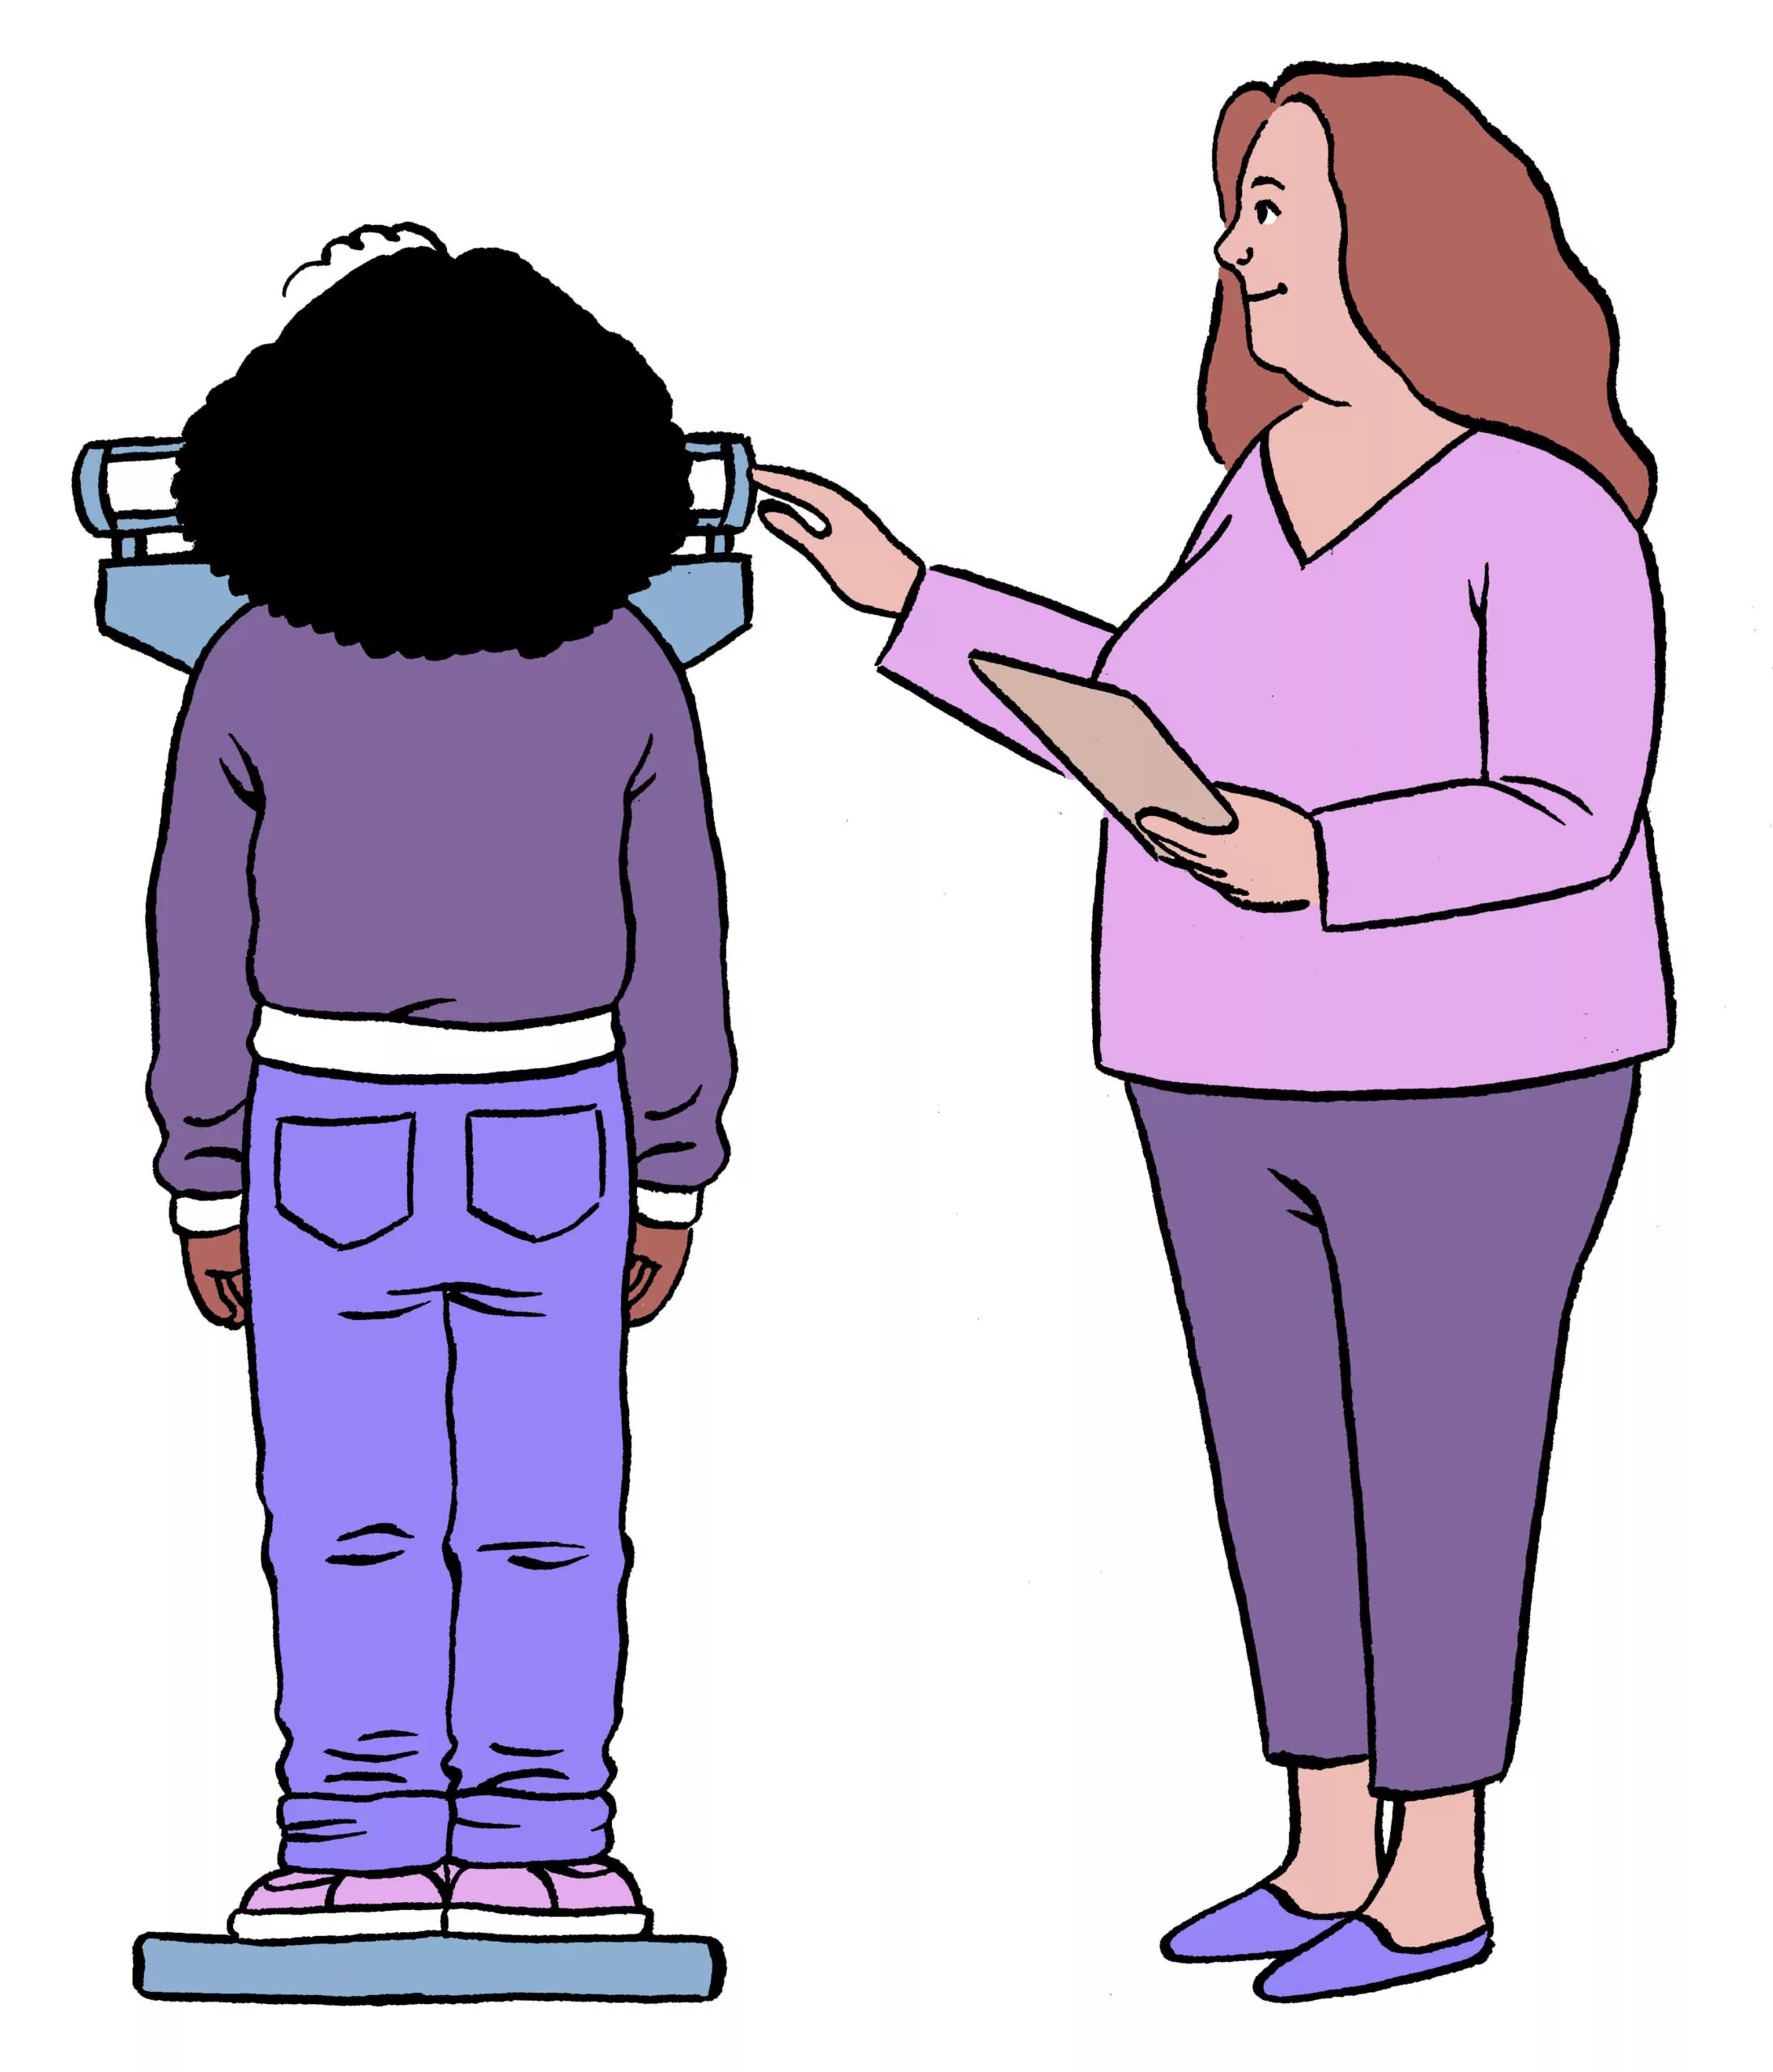 How we set recovery weights [Image description: Drawing of a doctor weighing a teen patient] depicts potential person with an eating disorder receiving therapy in Los Angeles, California